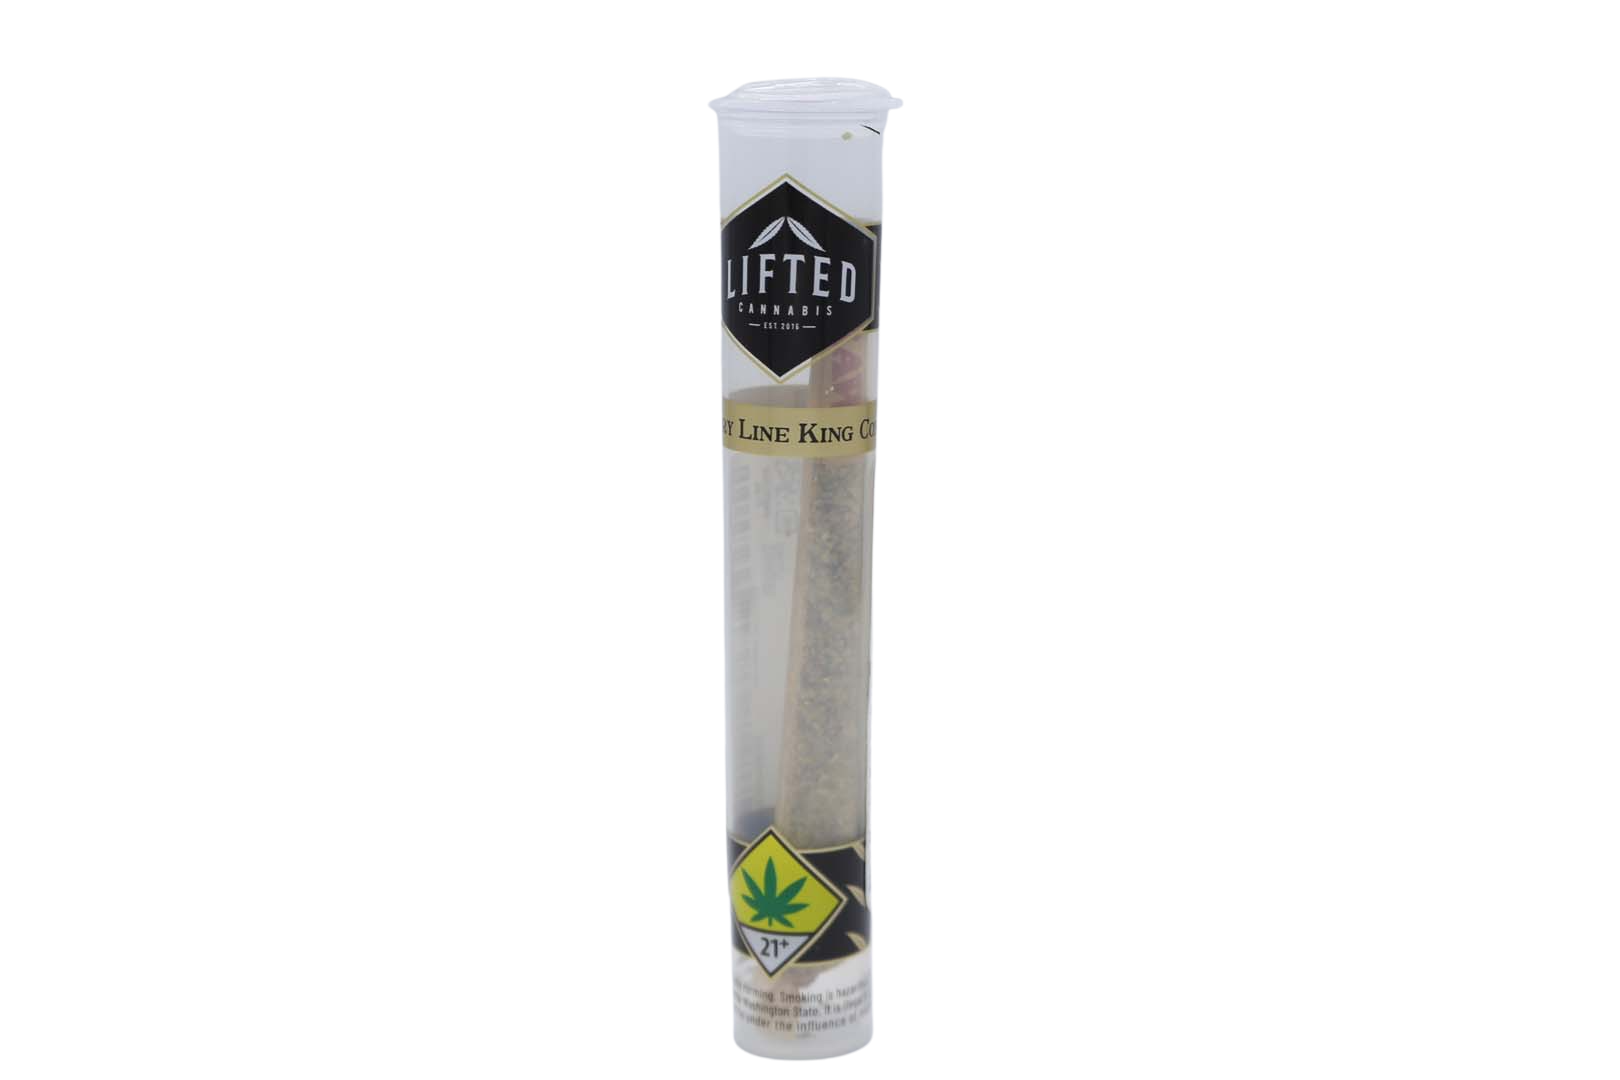 Lifted Pre-Roll Infused White Truffle SugarStix